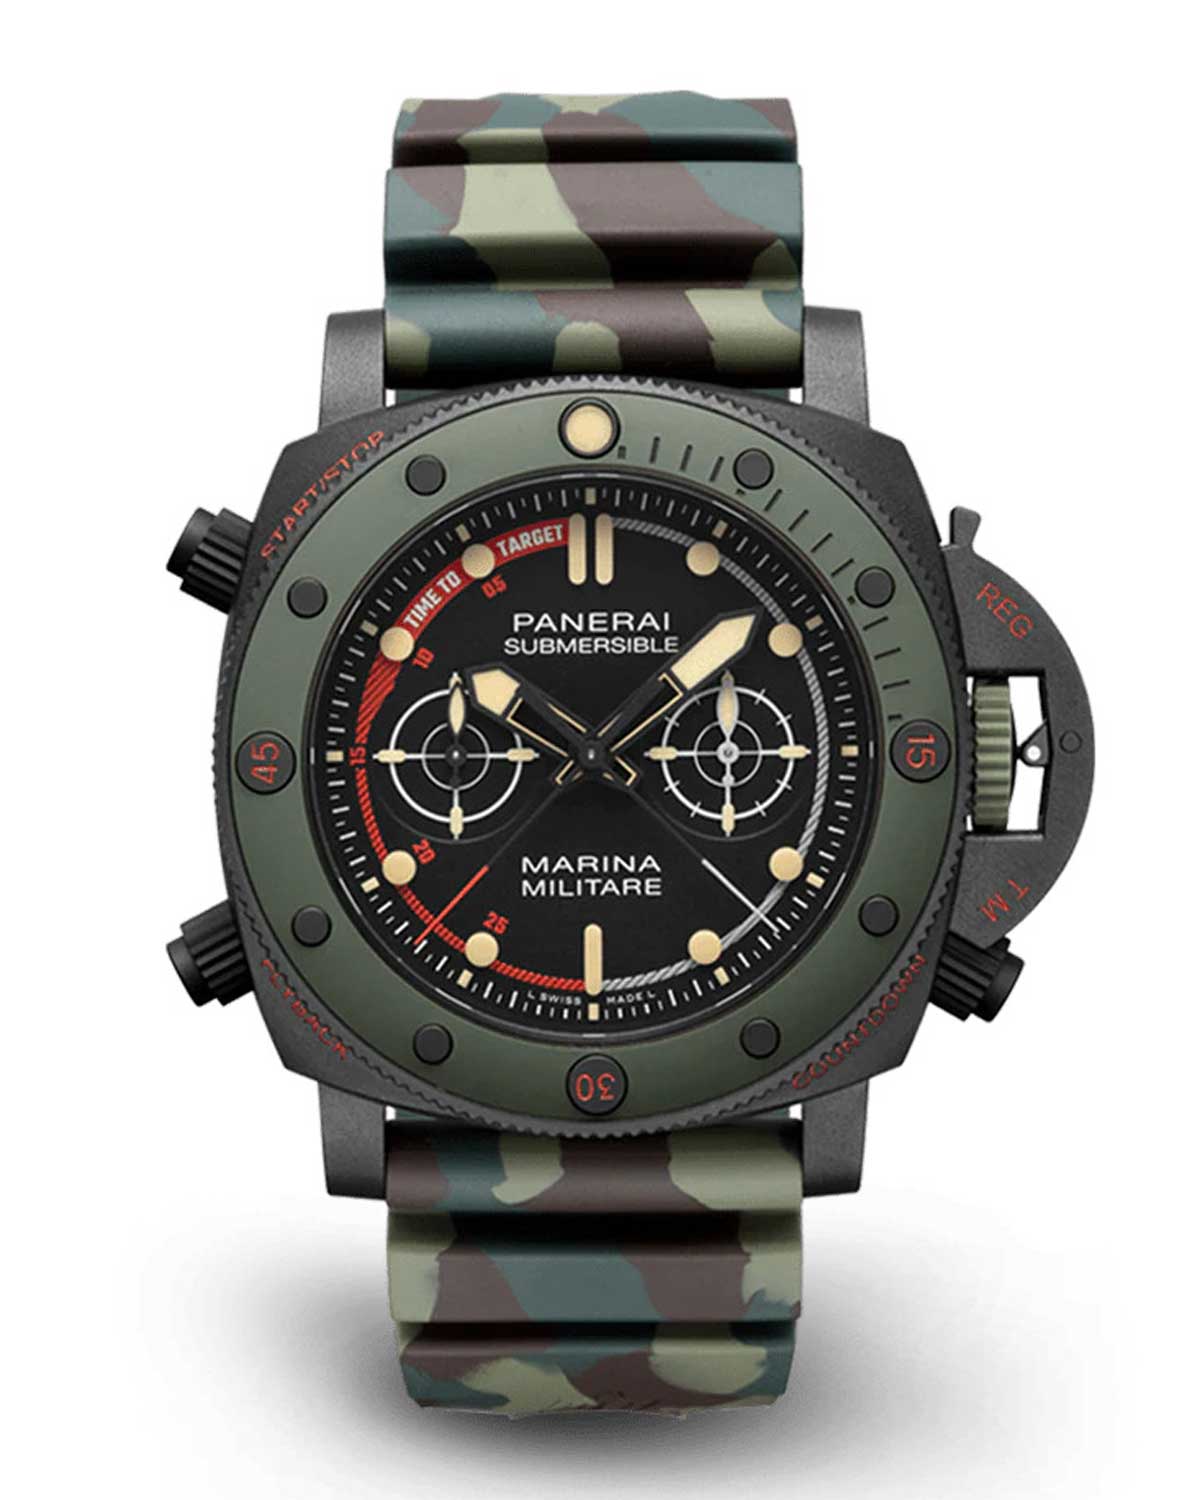 Submersible Forze Speciali Experience PAM01238